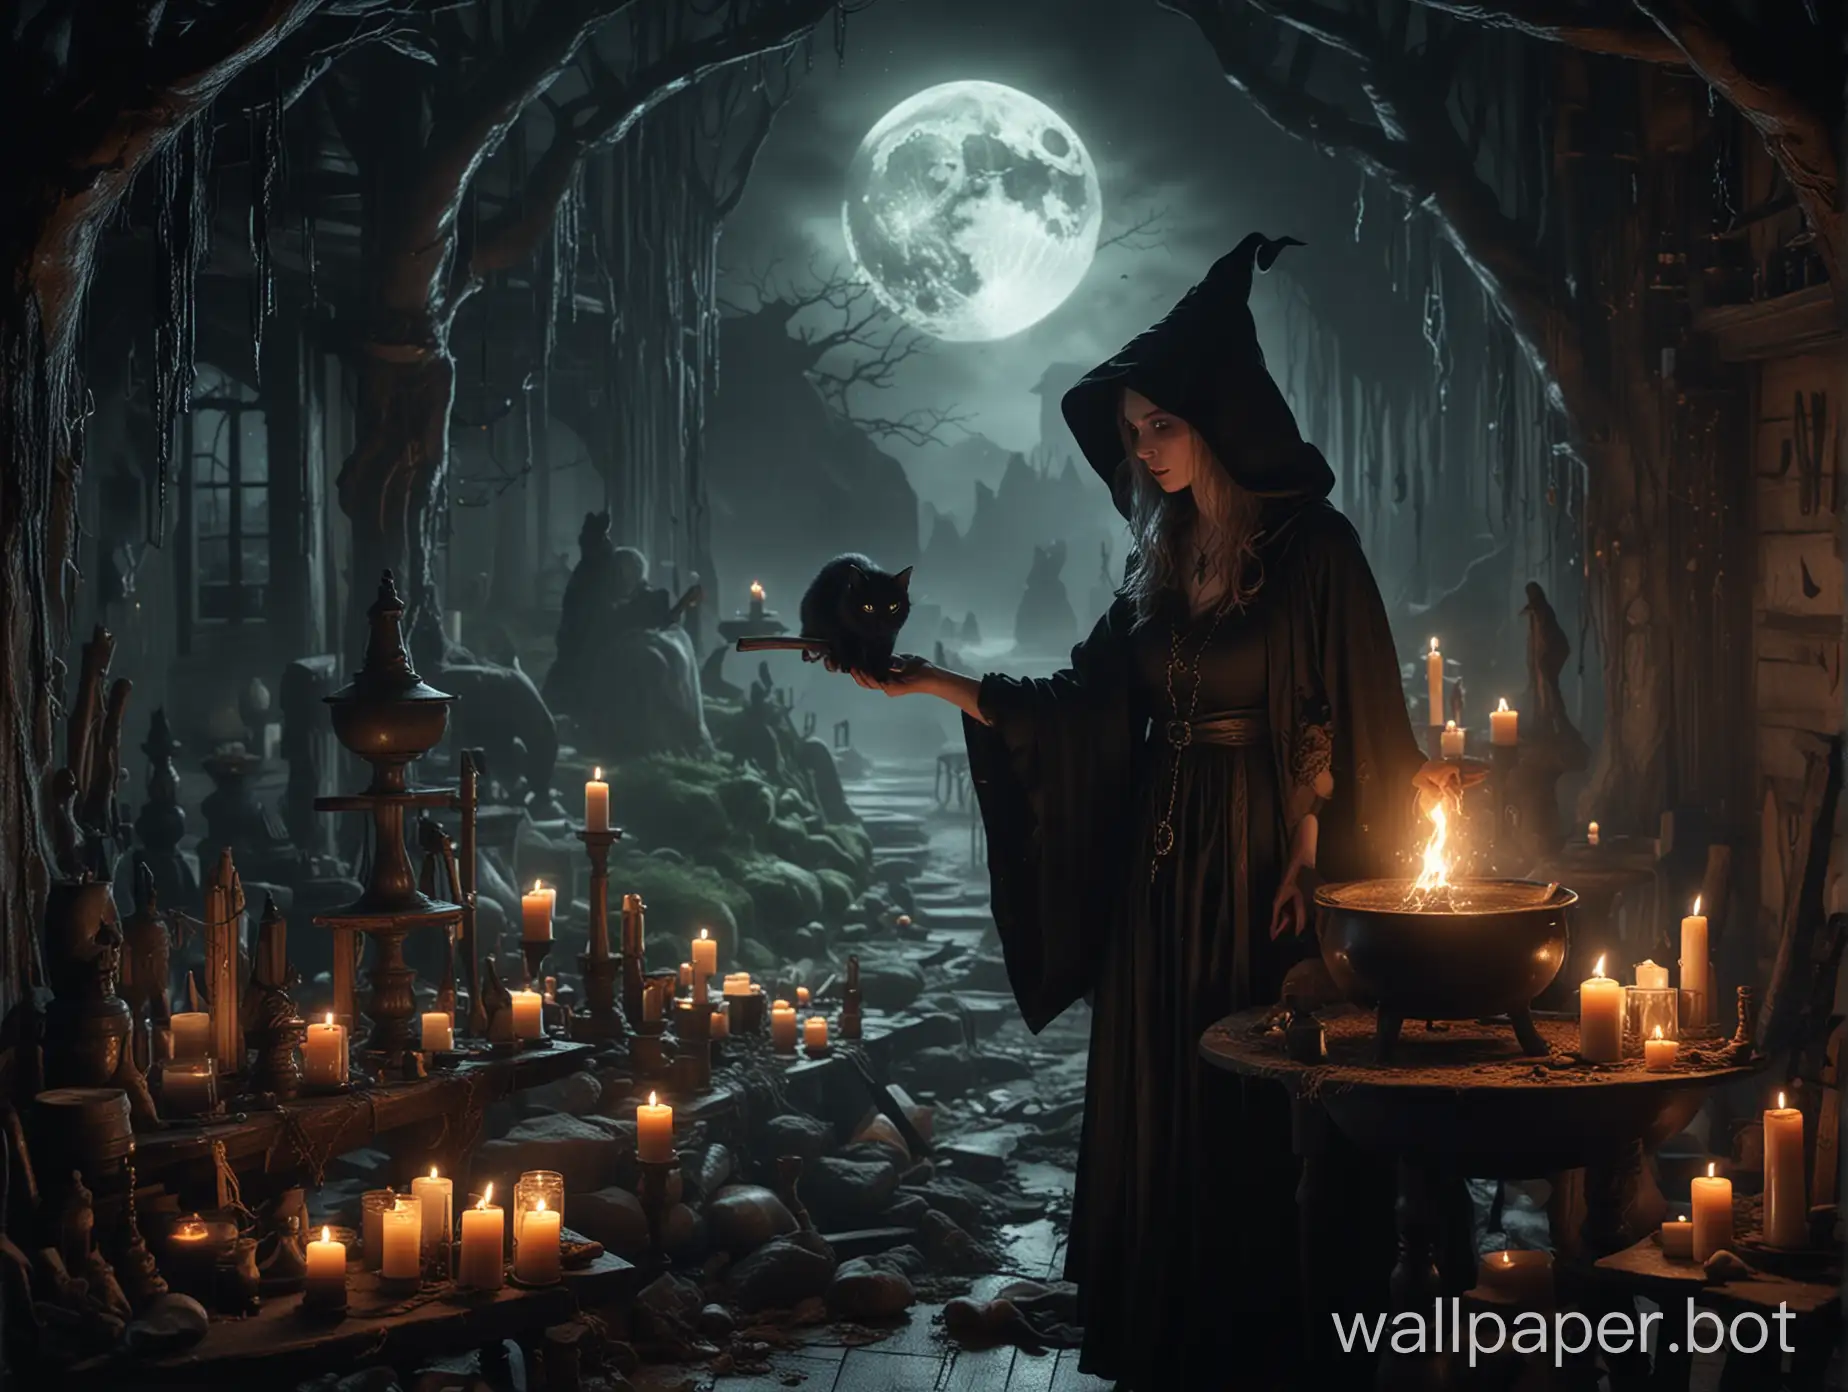 A striking cinematic image captures a beautiful witch casting a spell over a steaming cauldron, her dark hooded robe accentuating her mysterious presence. Her piercing eyes glint with mischief, as her black cat watches her intently with its green eyes locked onto the swirling potion. The witch uses an upside-down broomstick as a whimsical stirring tool, adding a touch of enchantment to the scene. Illuminated by flickering candles and glowing runes, the room is draped in shadows, while the eerie full moon casts a silvery glow over the dark fantasy landscape. The atmosphere is bewitching and captivating, drawing the viewer into the witch's spellbinding realm., cinematic, dark fantasy, photo